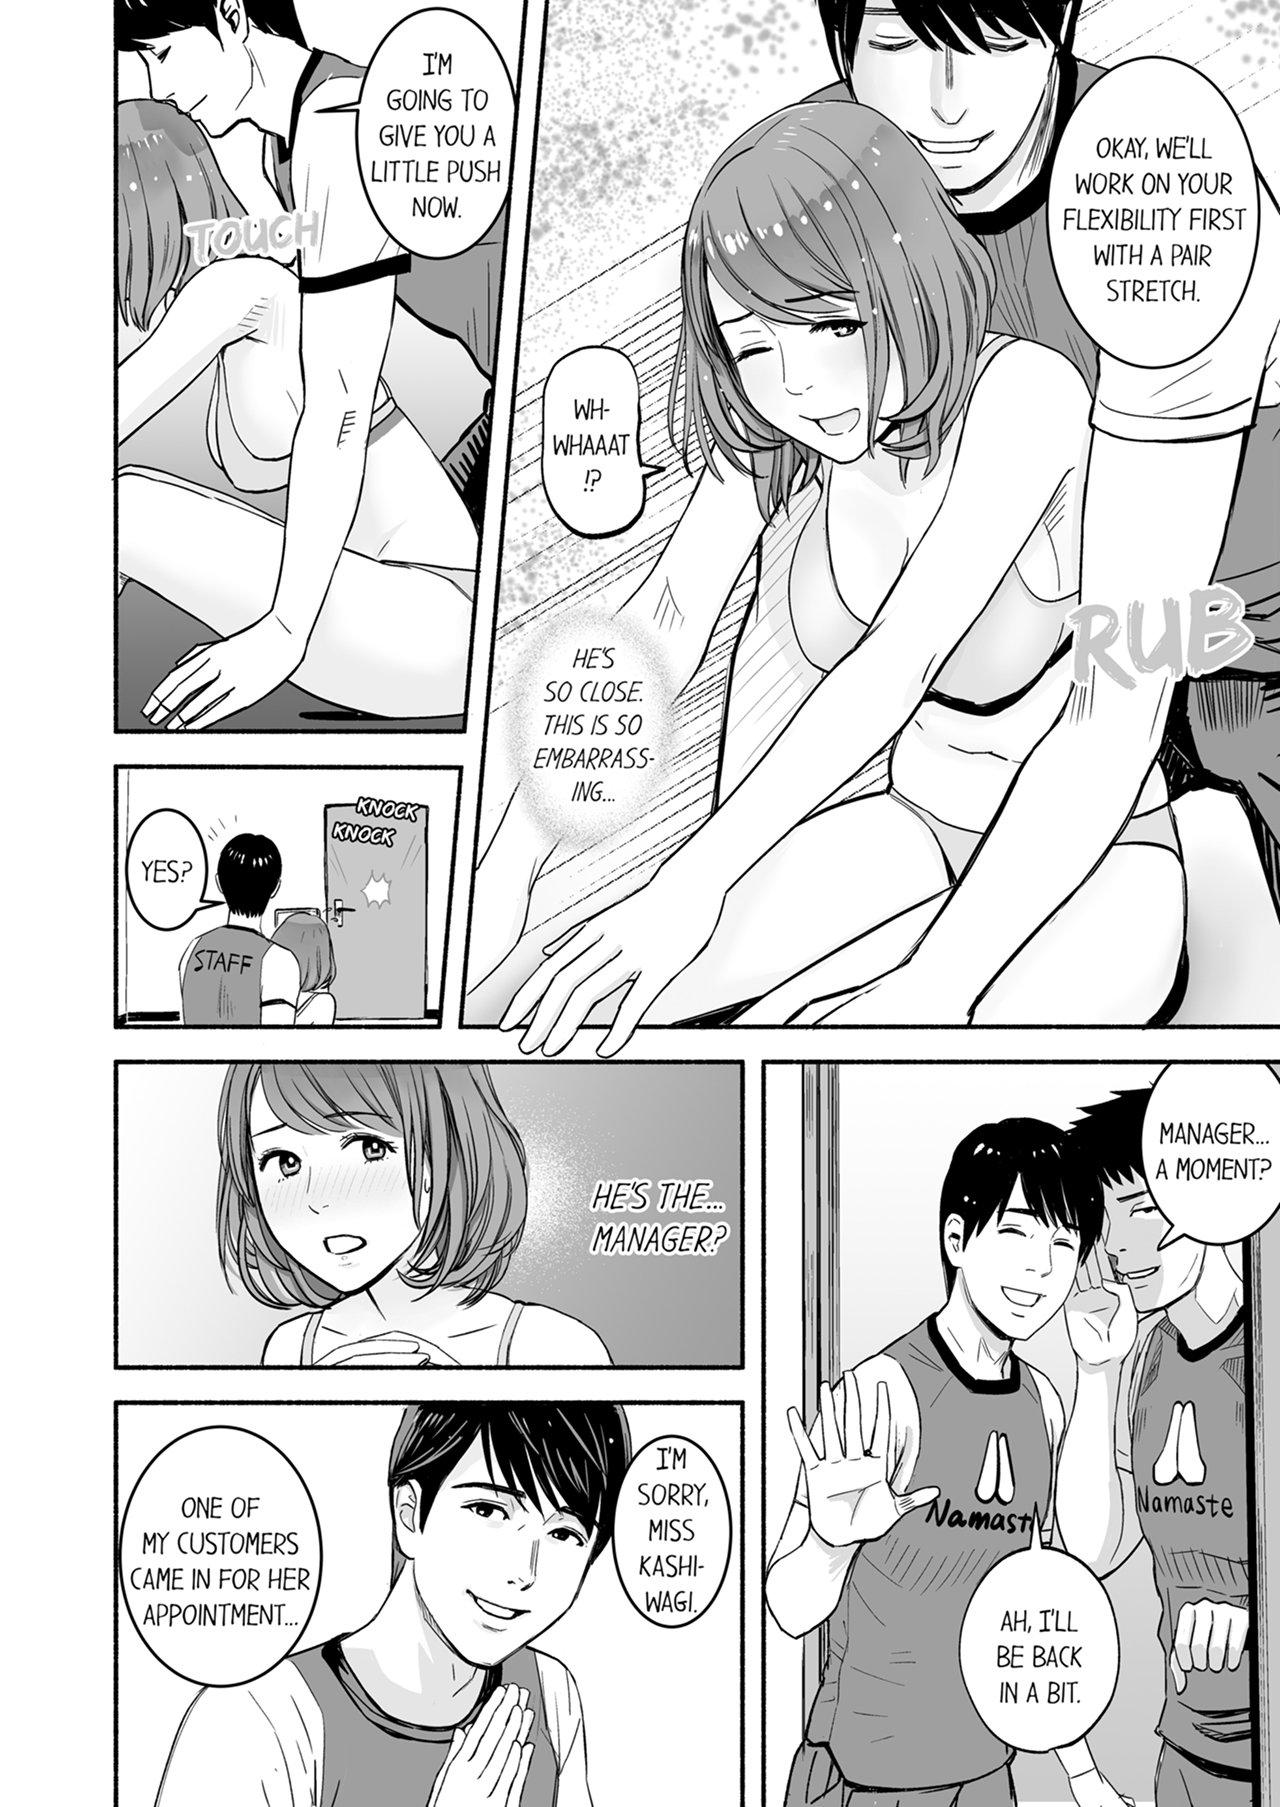 Girl Girl Your Yoga Posture Is Too Sexy, Instructor! - Original Affair - Page 7